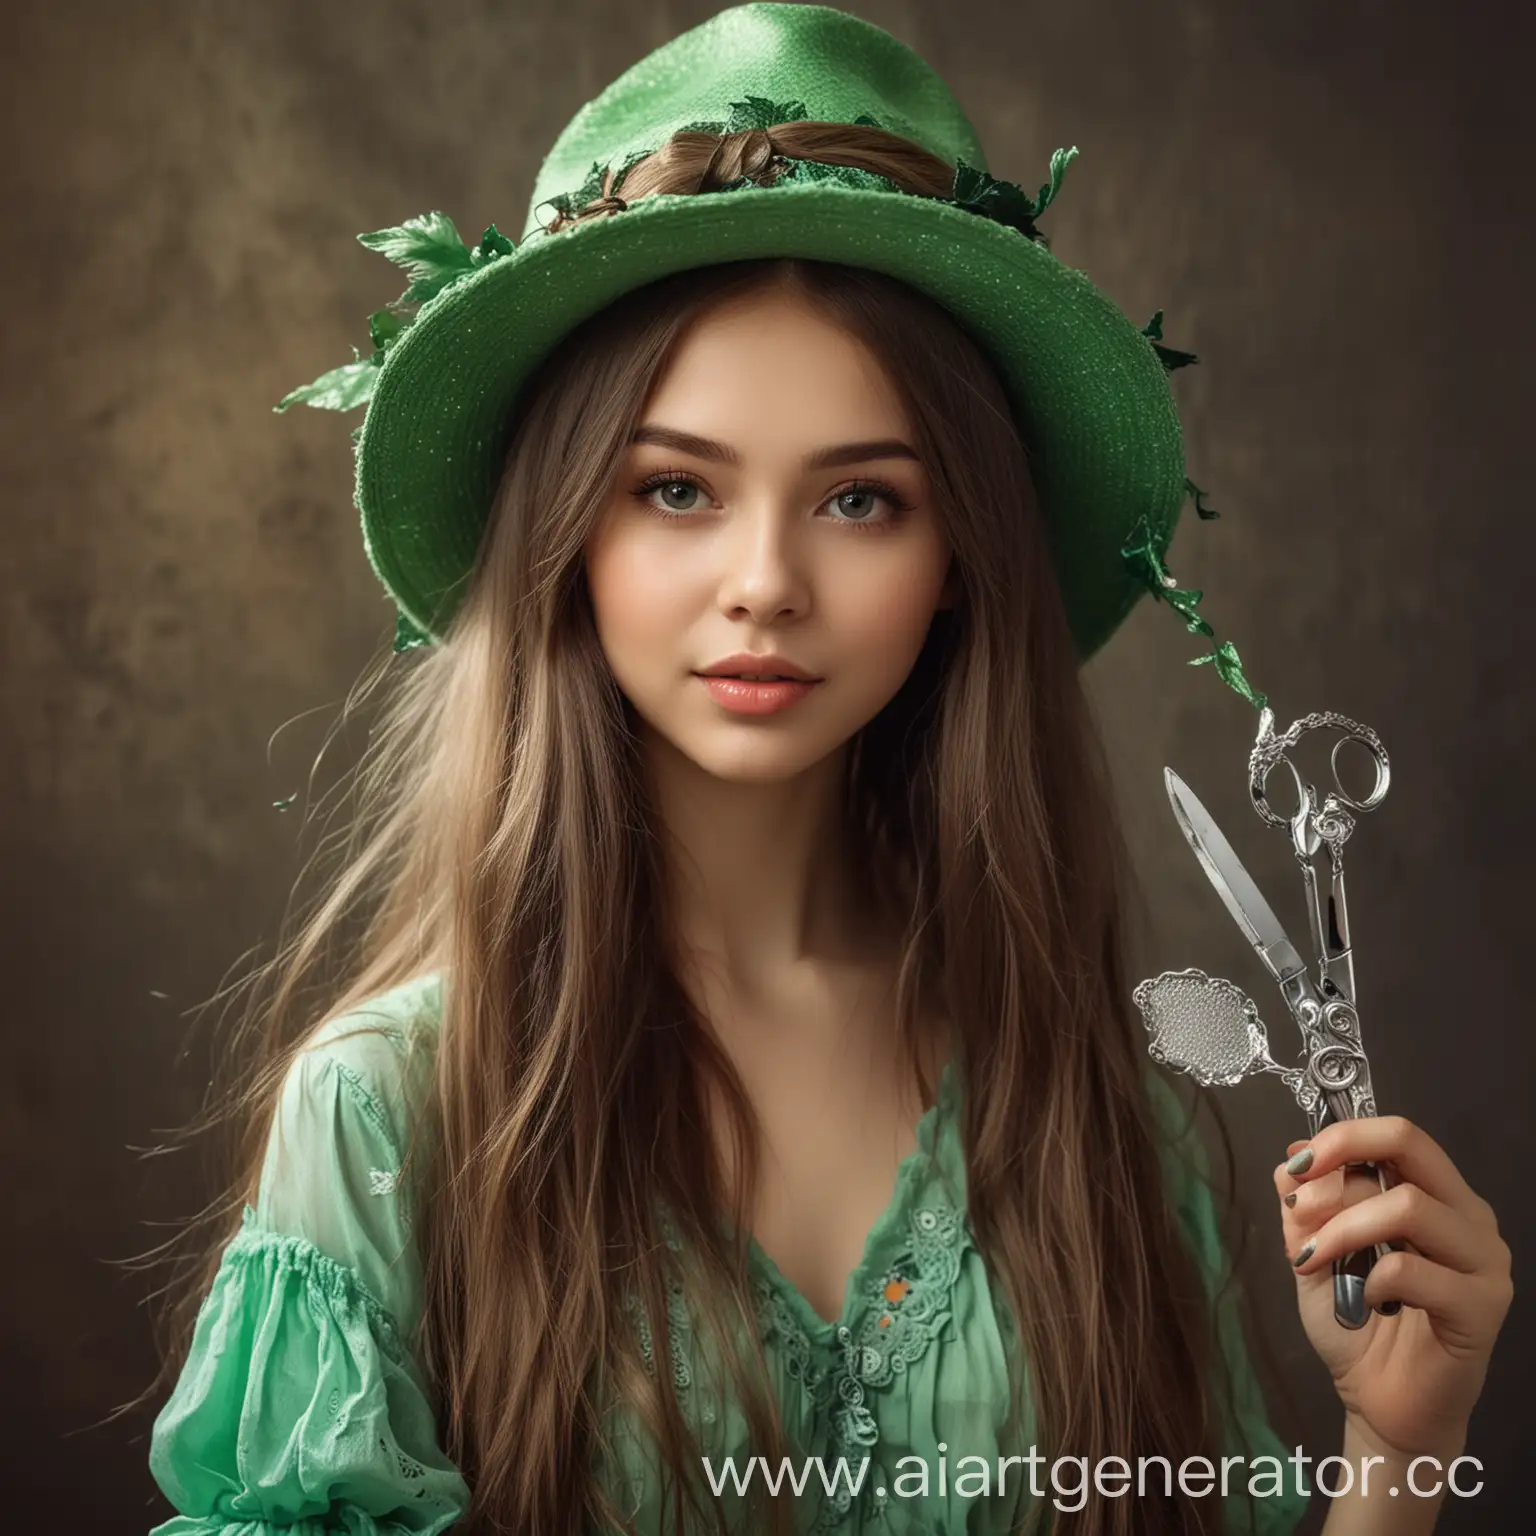 Beautiful-Girl-in-a-Green-Hat-with-Floating-Hair-Styling-Tools